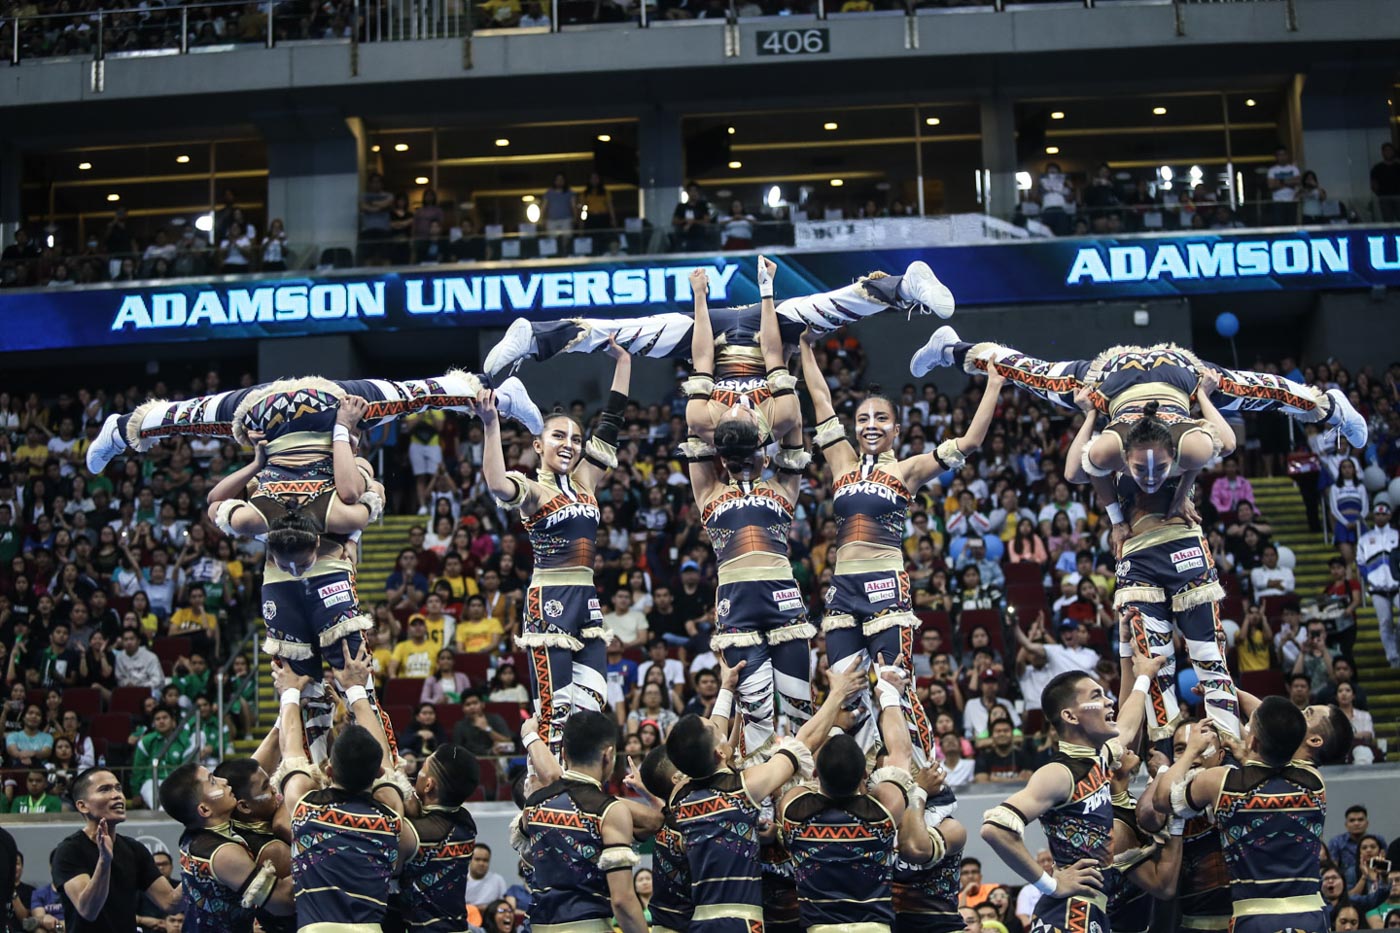 OVERPOWERING. The Adamson Pep Squad flashes some tough stunts to edge out traditional powerhouse UST for the last spot on the podium. Photo by Josh Albelda/Rappler   